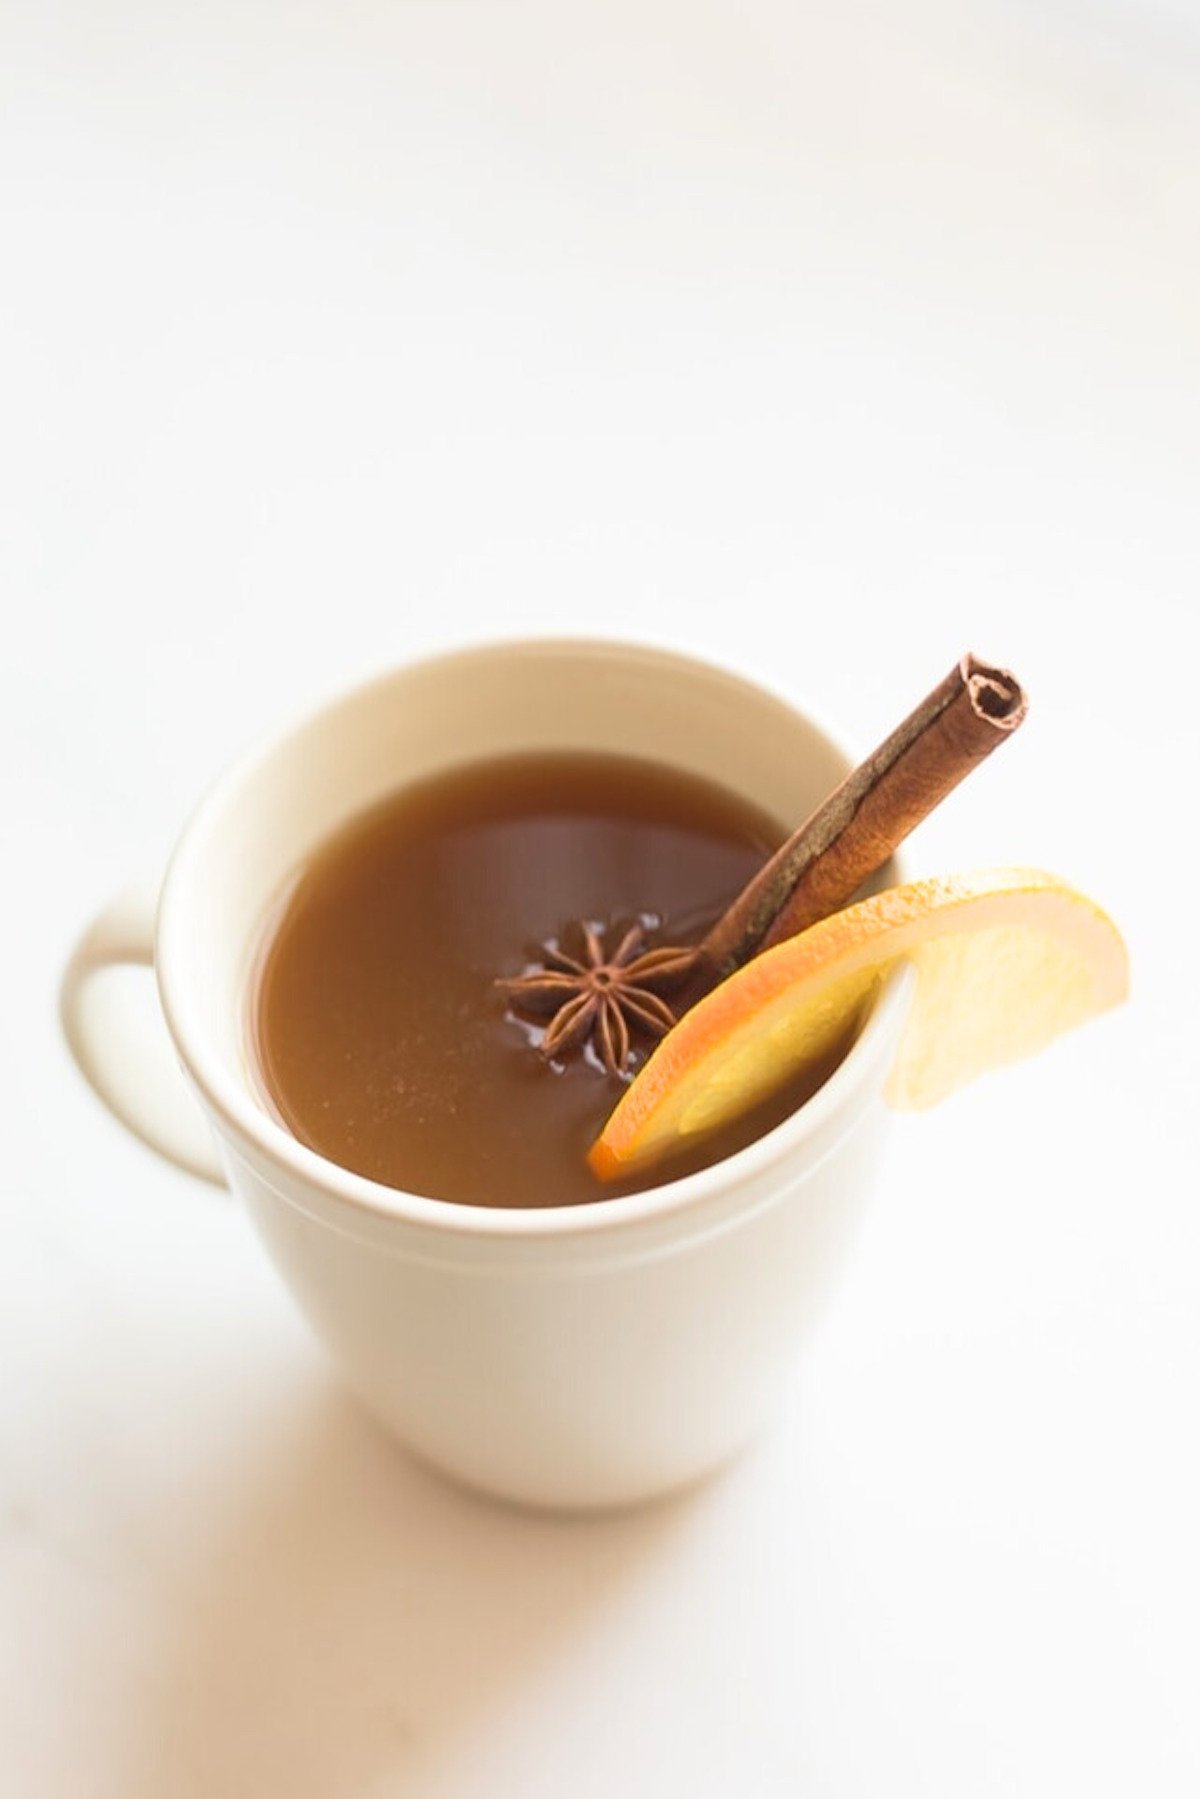 A cup of spiked apple cider garnished with a cinnamon stick, star anise, and a slice of orange.